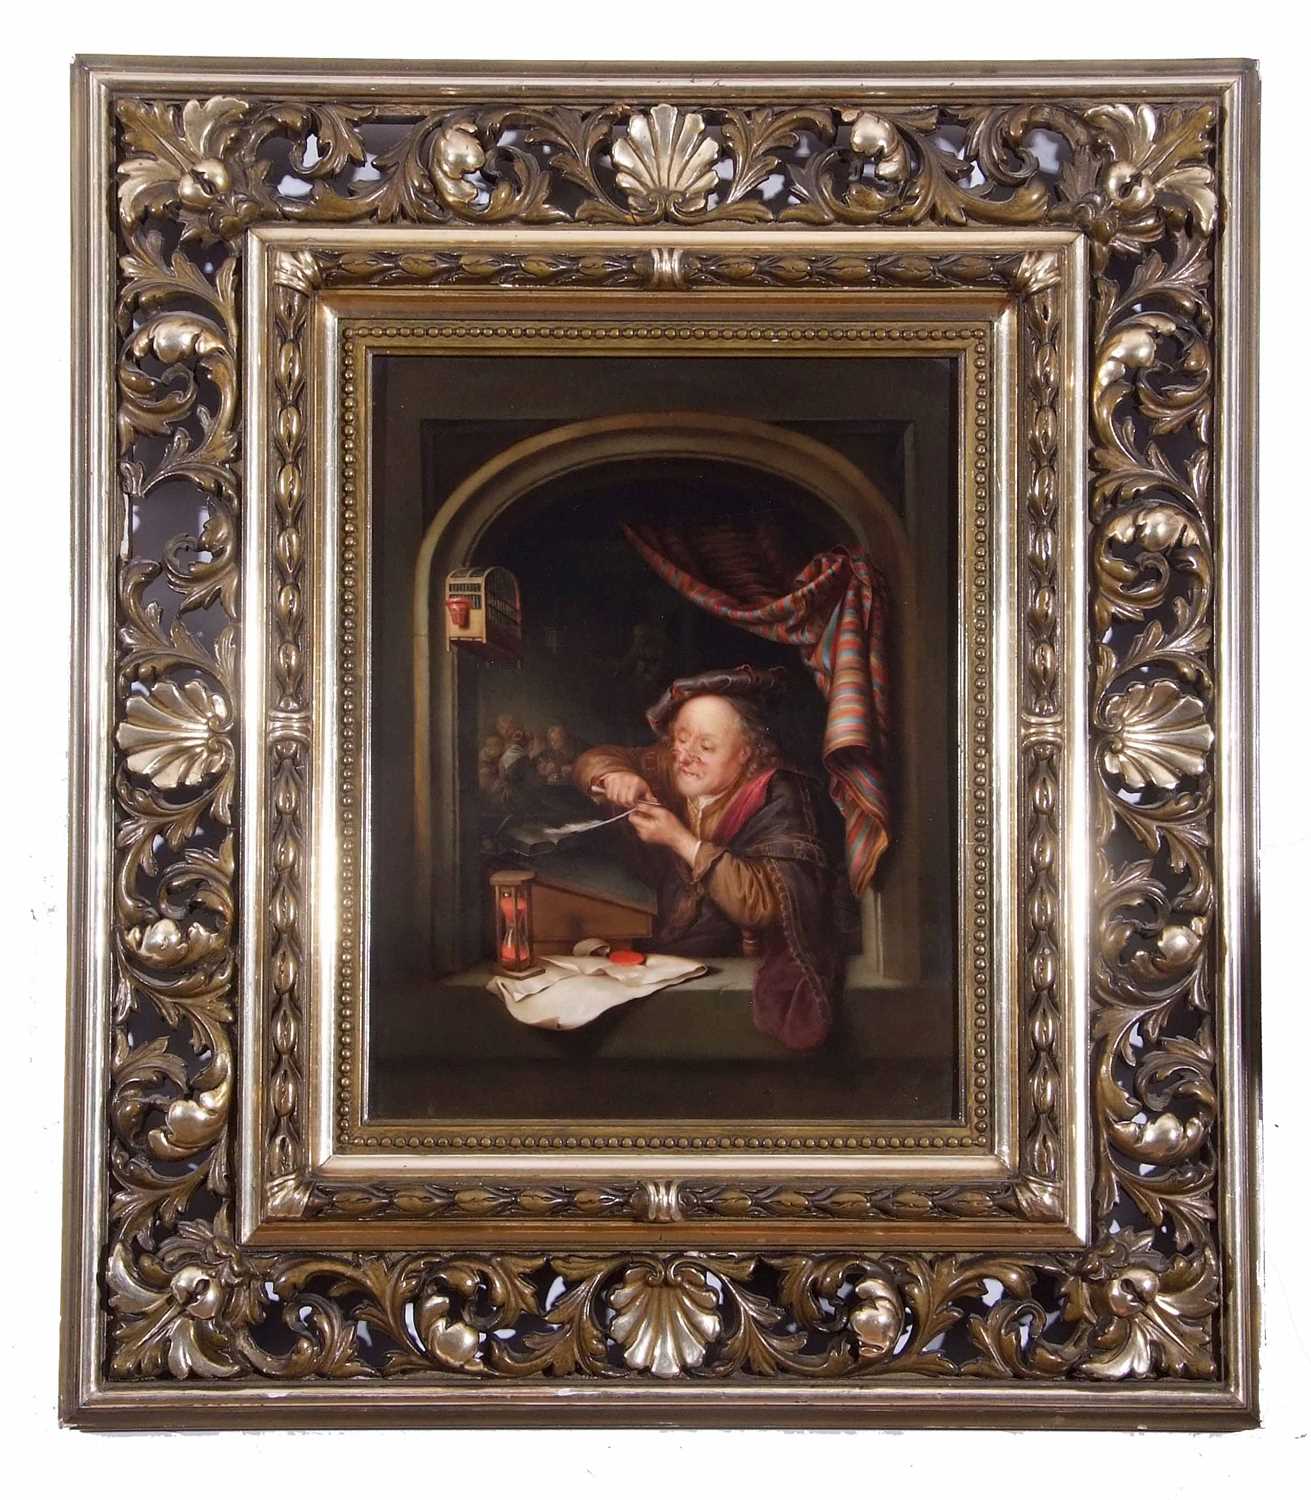 A Meissen porcelain plaque depicting an old schoolmaster sharpening his quill with children in a - Image 2 of 3